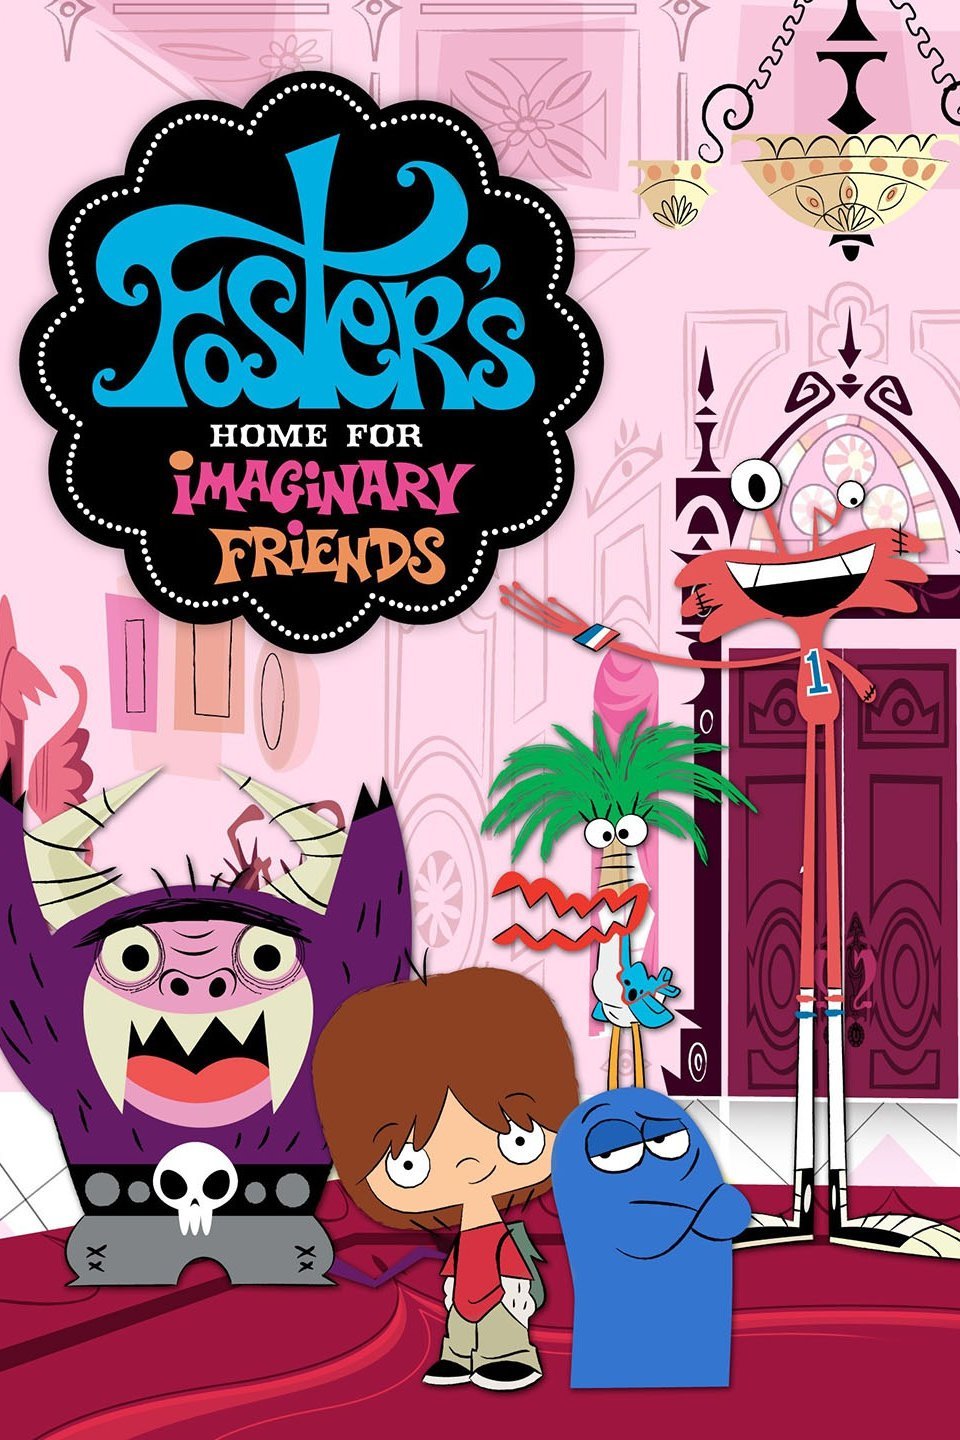 Foster's Home for Imaginary Friends | Soundeffects Wiki | FANDOM ...
